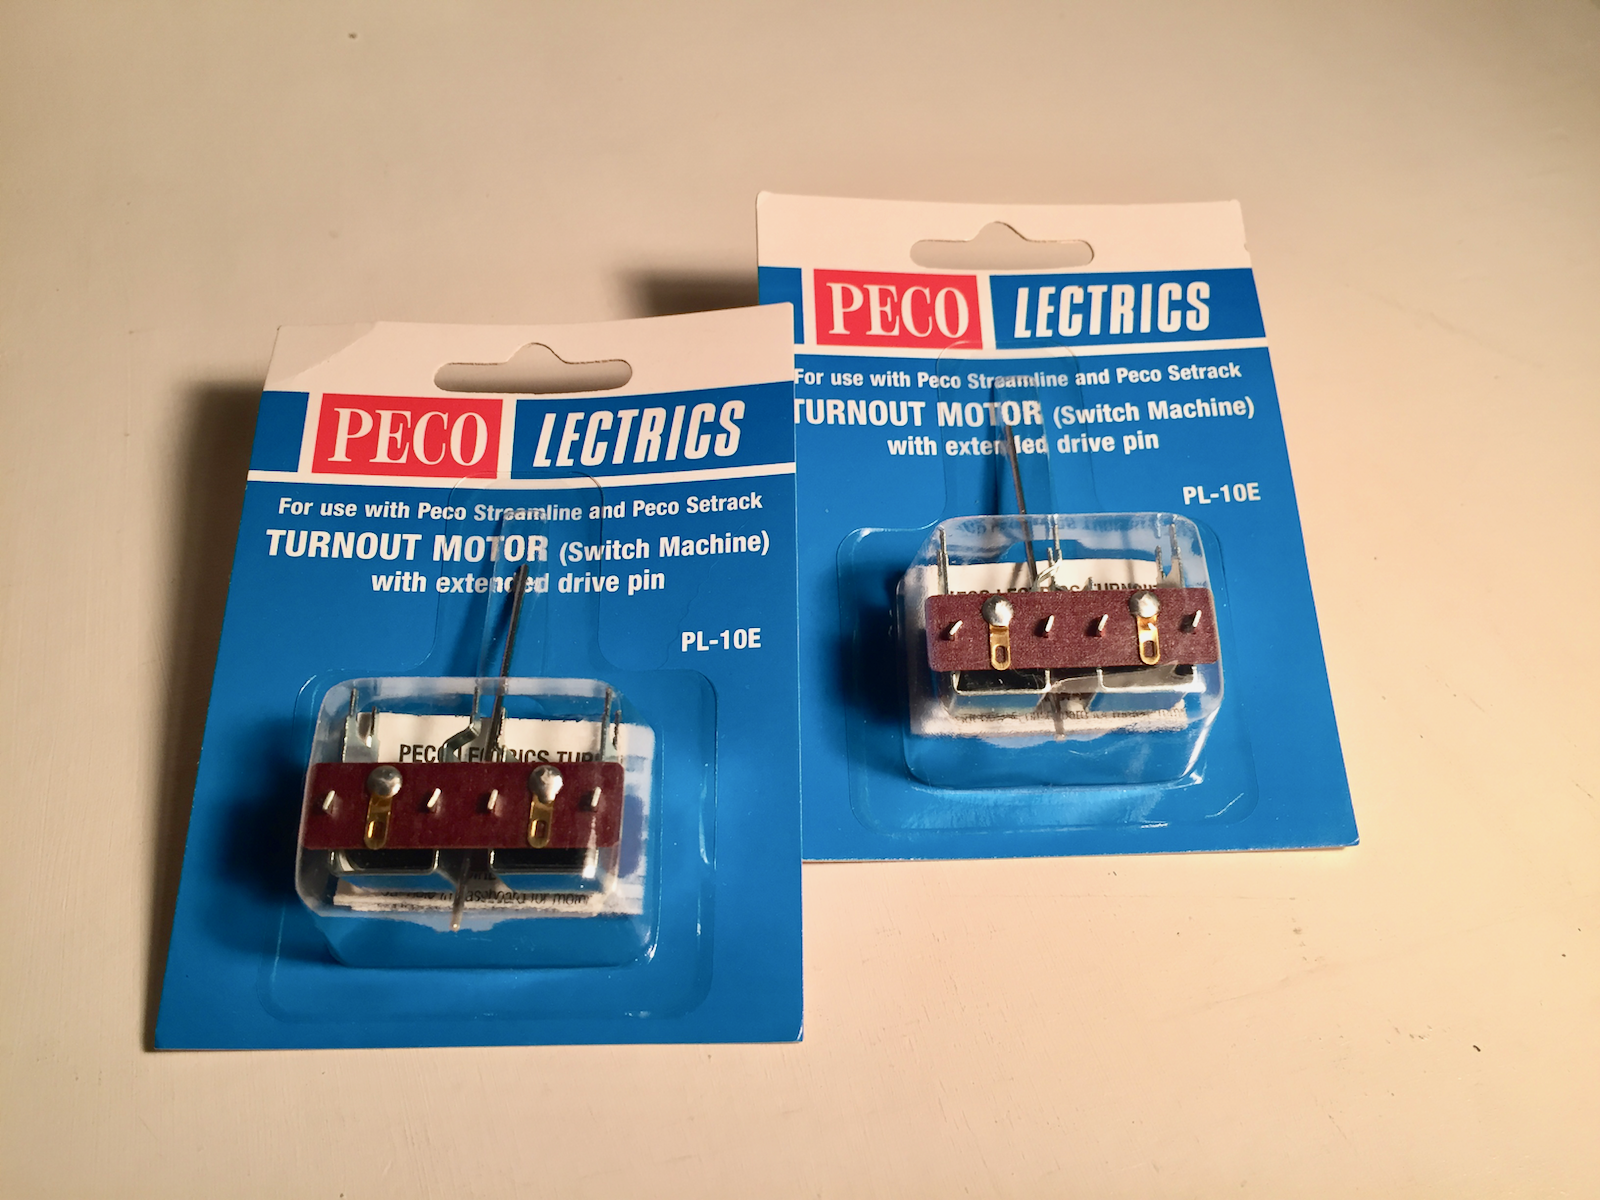 OR801 | 2x PECO ENGLAND PL-10E TURNOUT MOTOR (SWITCH MACHINE) | AS NEW